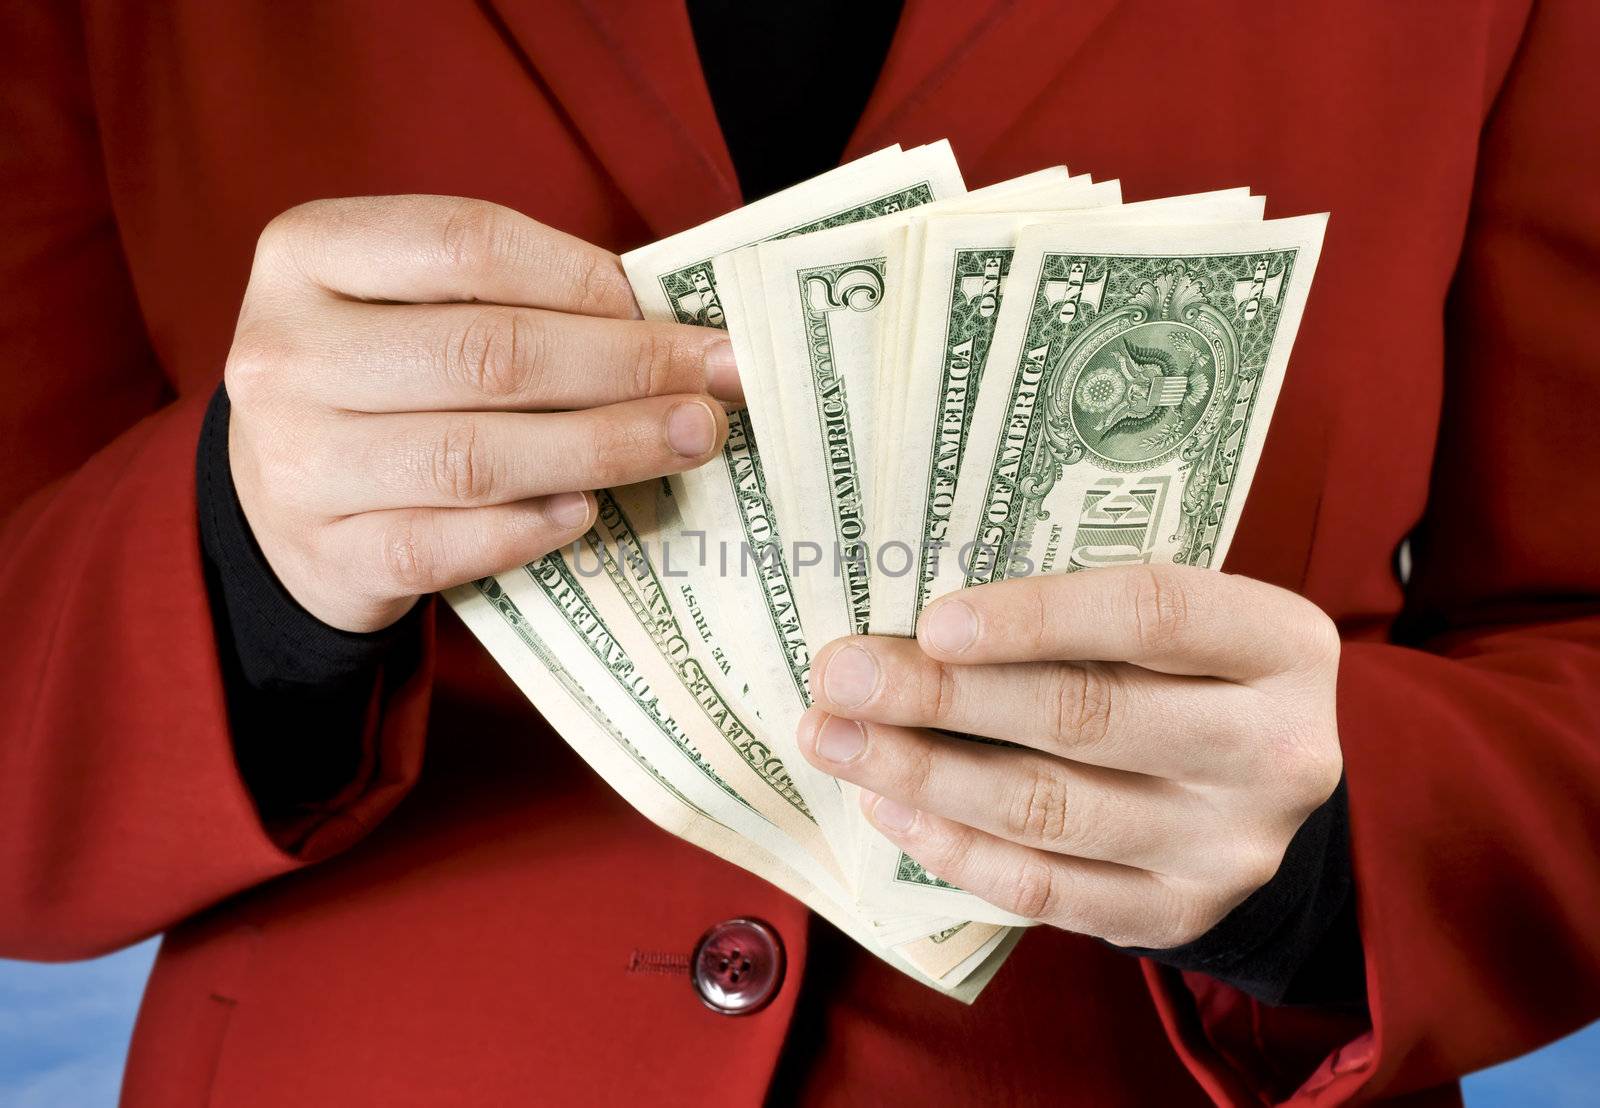 Female dressed in a red business dress using hands to count American dollars.

Studio shot.